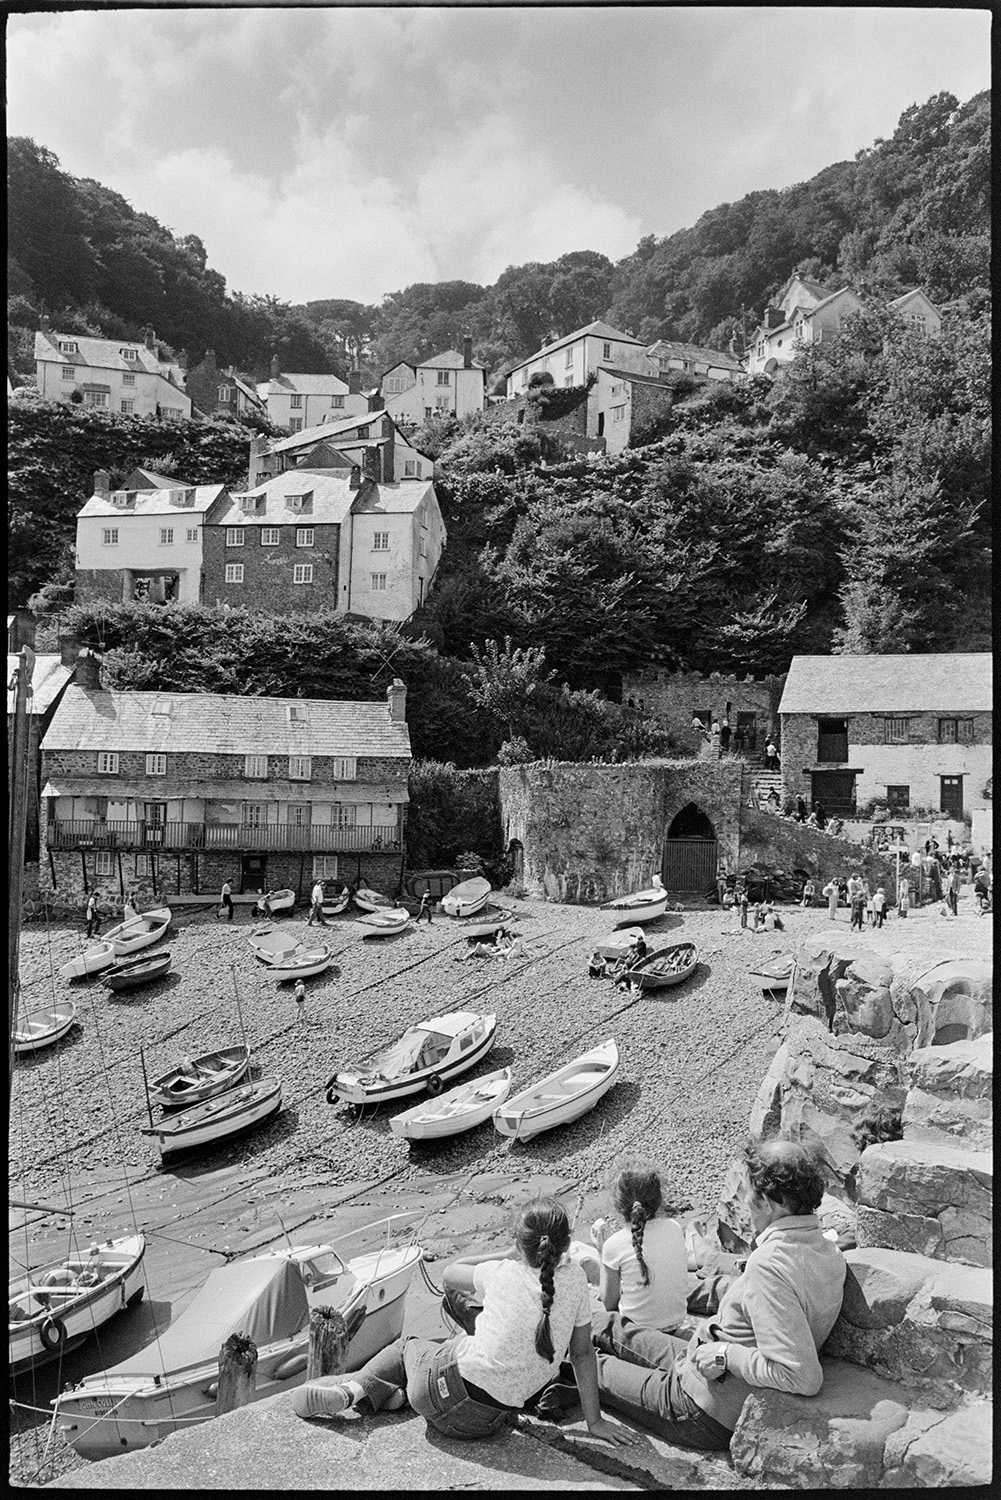 Holidaymakers, seaside village taking photographs, sunbathing, pebble beach with small boats. 
[Holidaymakers sitting on the harbour wall overlooking the beach at Clovelly. Lots of small boats are moored on the pebble beach and houses can be seen on the valley hillside in the background.]